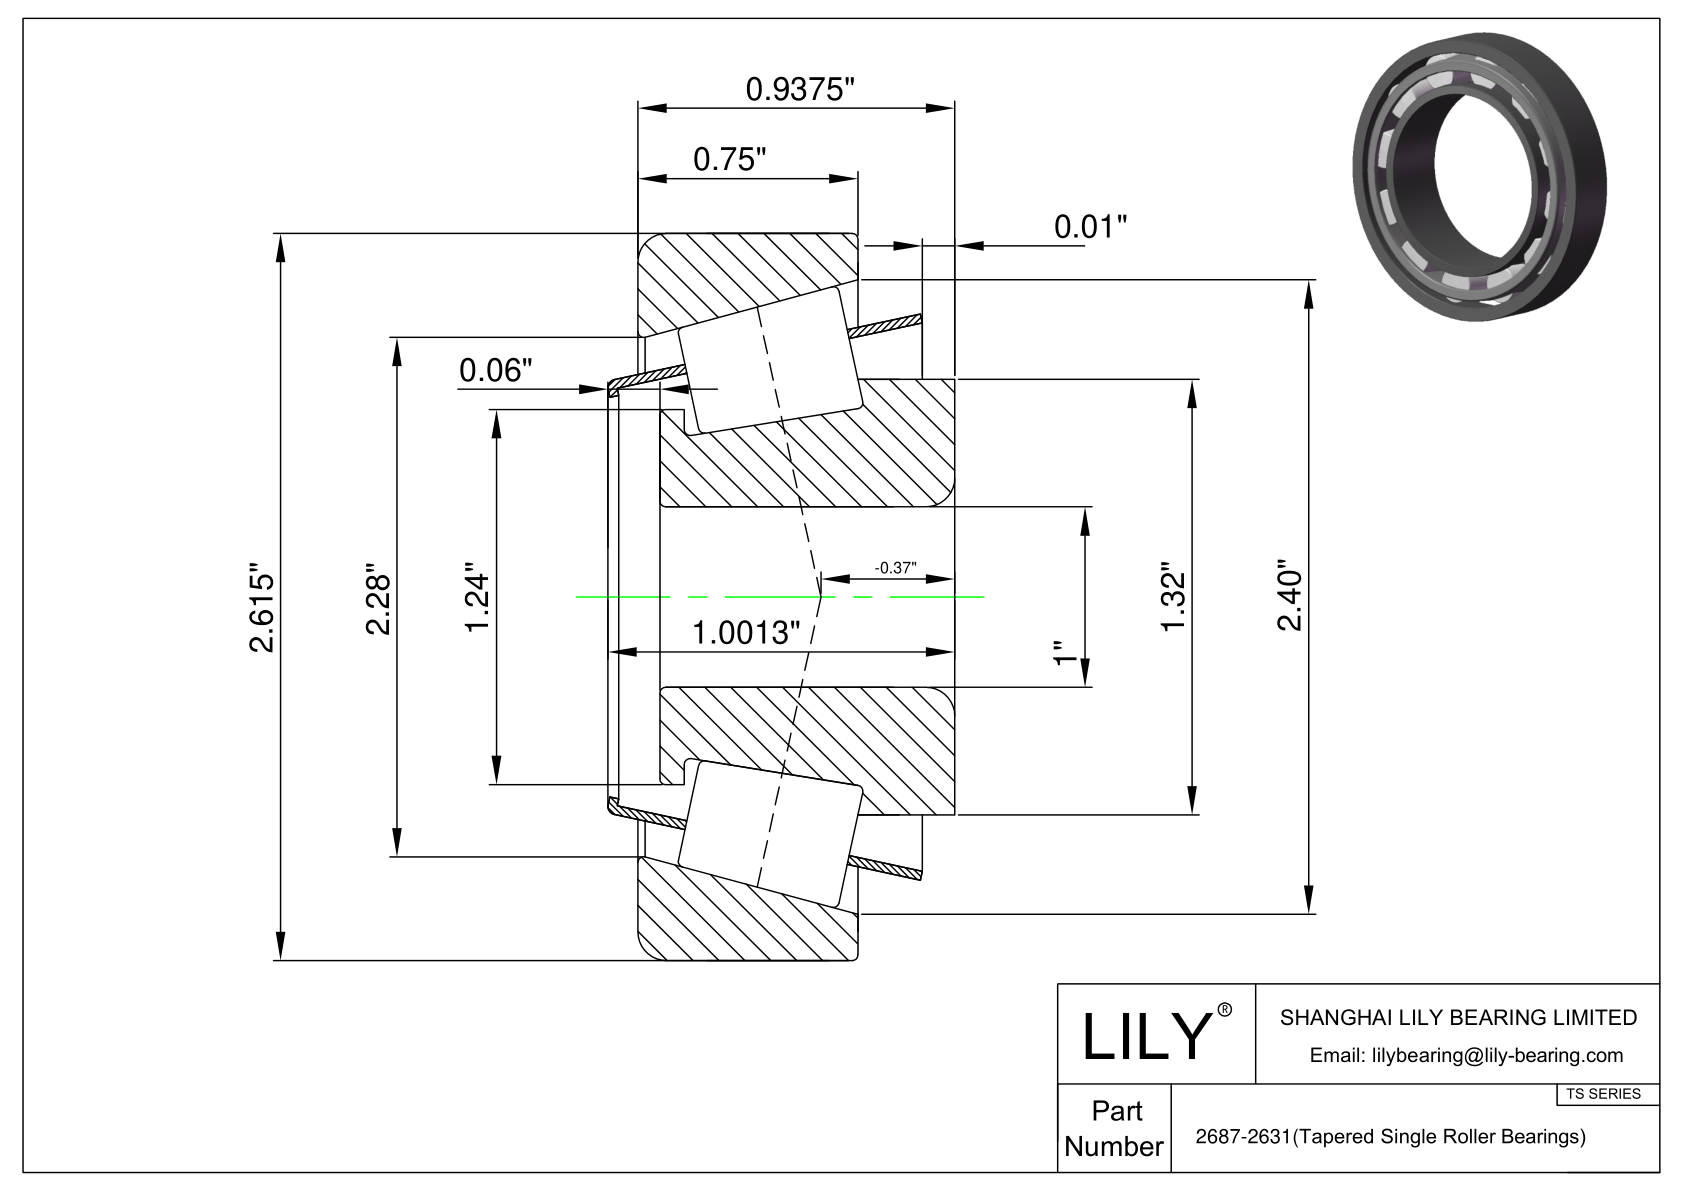 2687-2631 TS (Tapered Single Roller Bearings) (Imperial) cad drawing